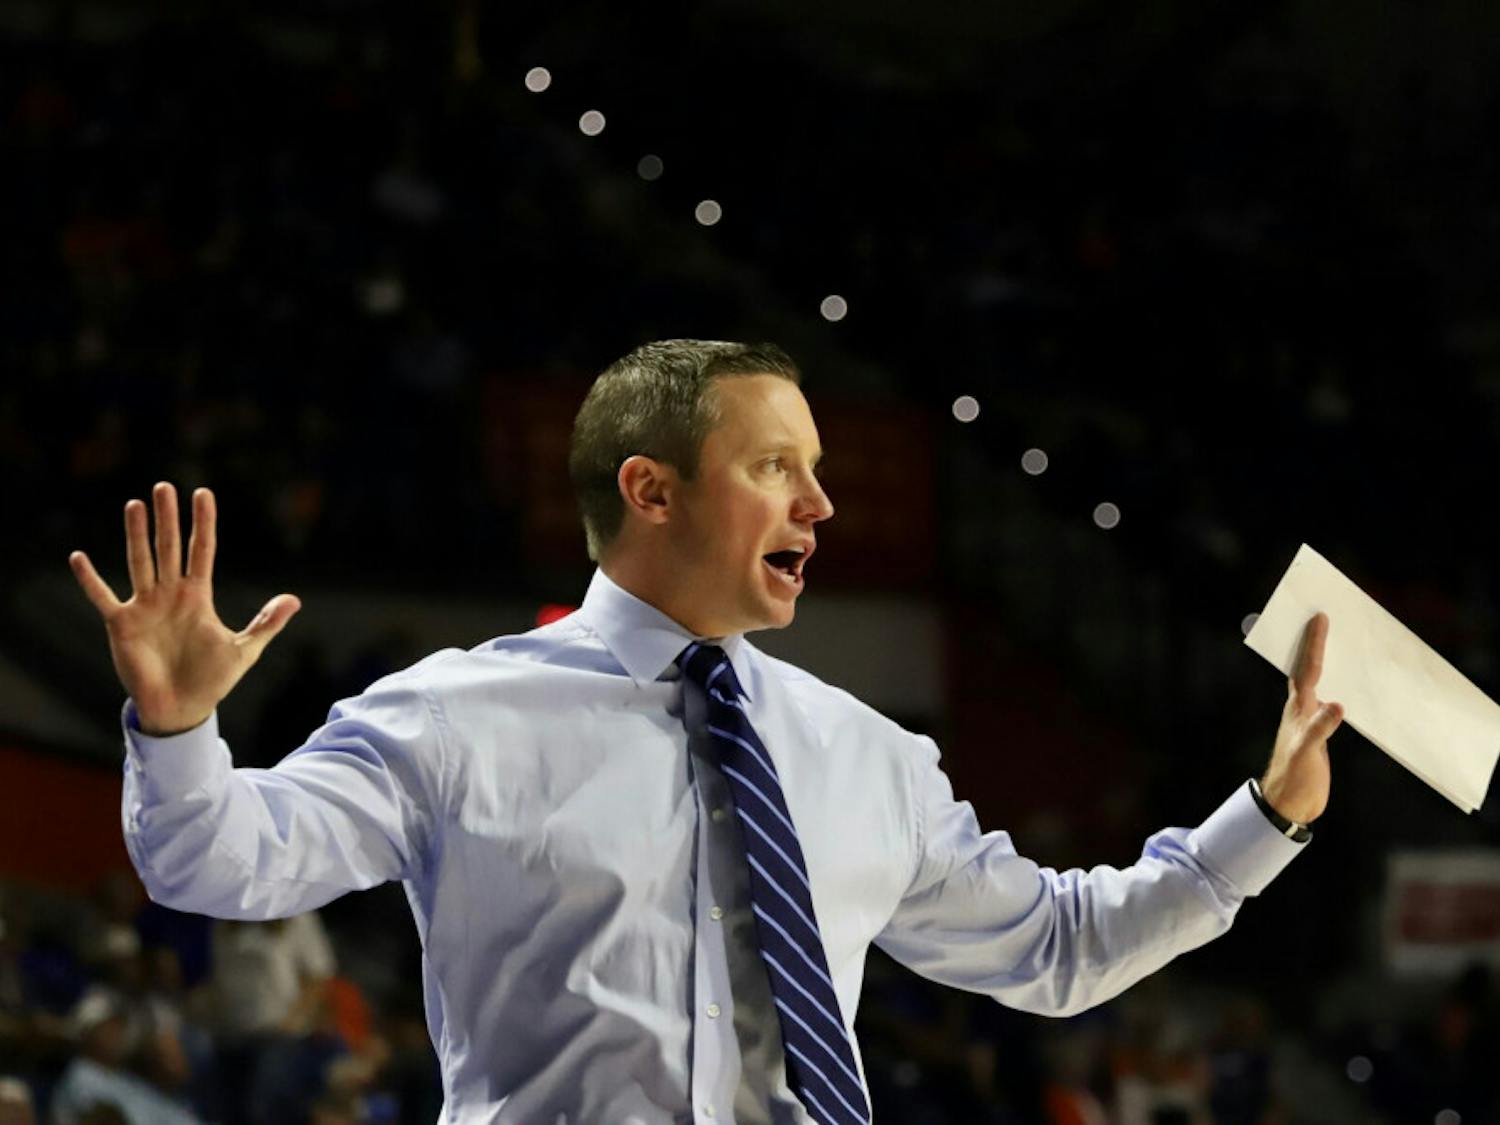 Gators coach Mike White is impressed with what he's seen from Boston College already this season. Florida will play the Eagles Thursday night at 9:30 p.m.